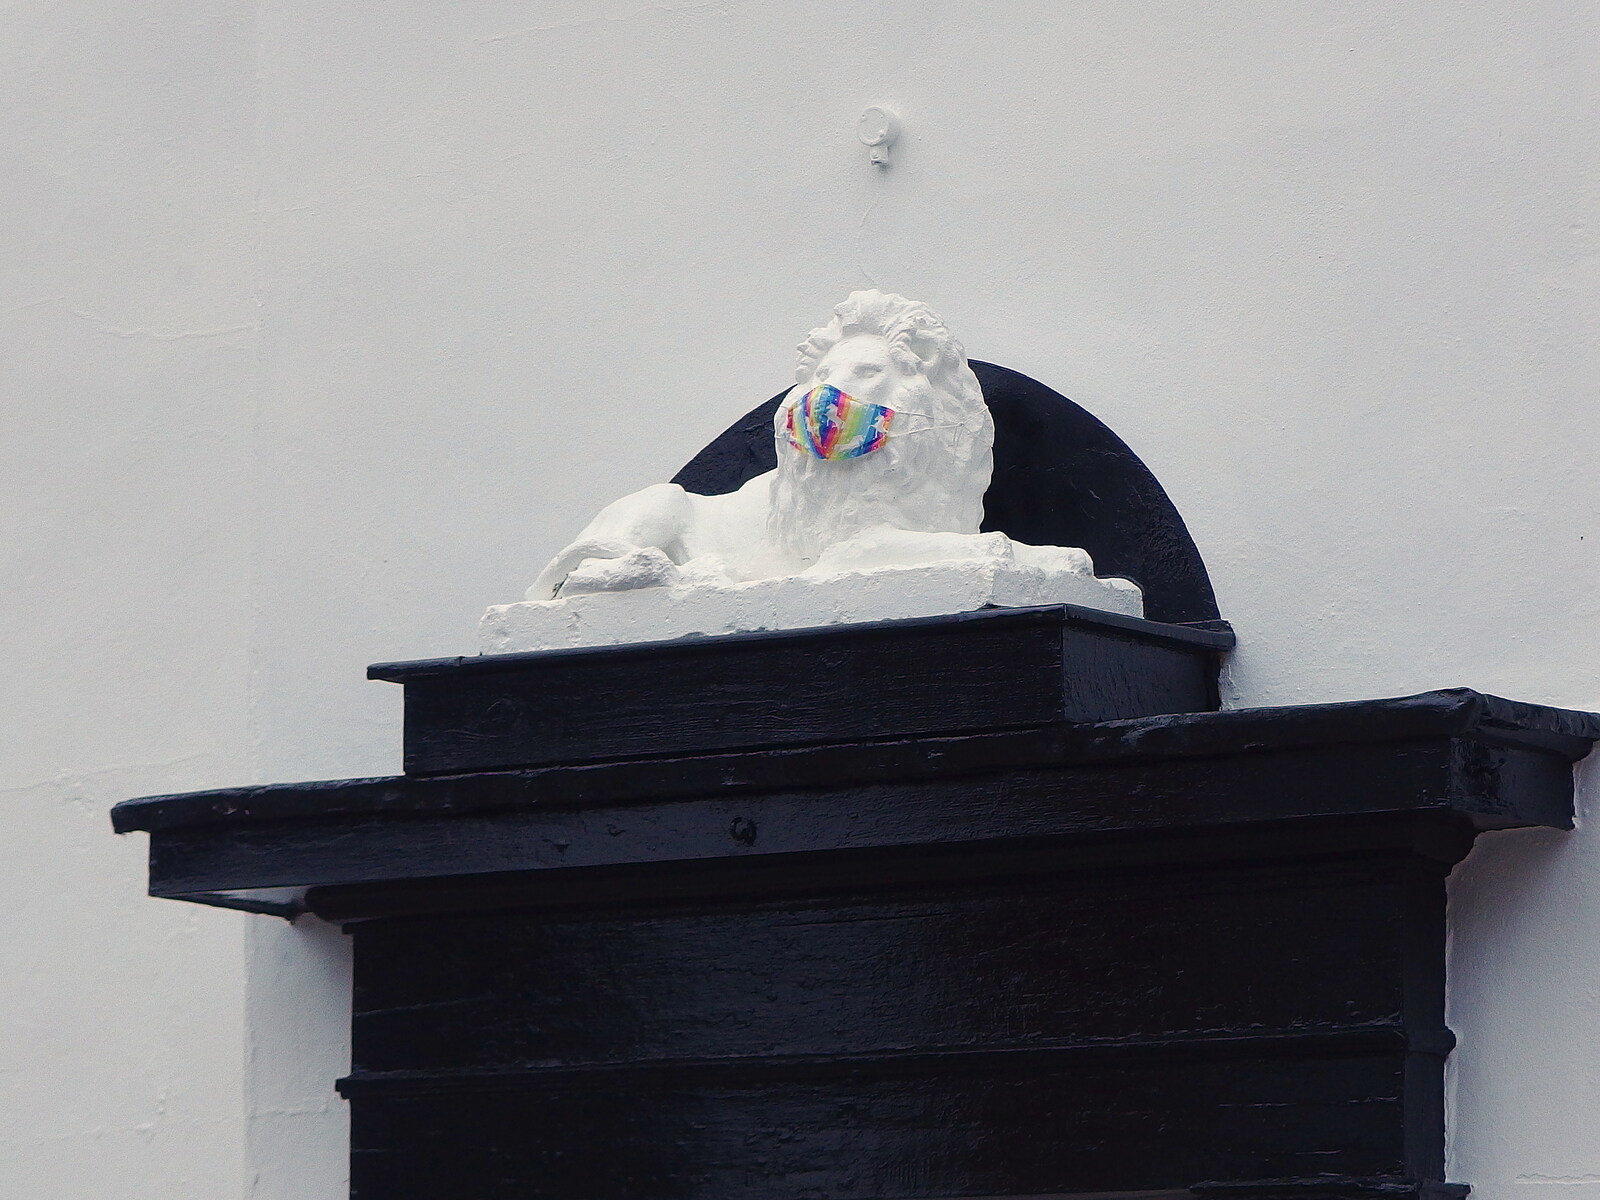 The White Lion in Eye has a mask on from Sunday Lunch at the Village Hall, Brome, Suffolk - 10th October 2021